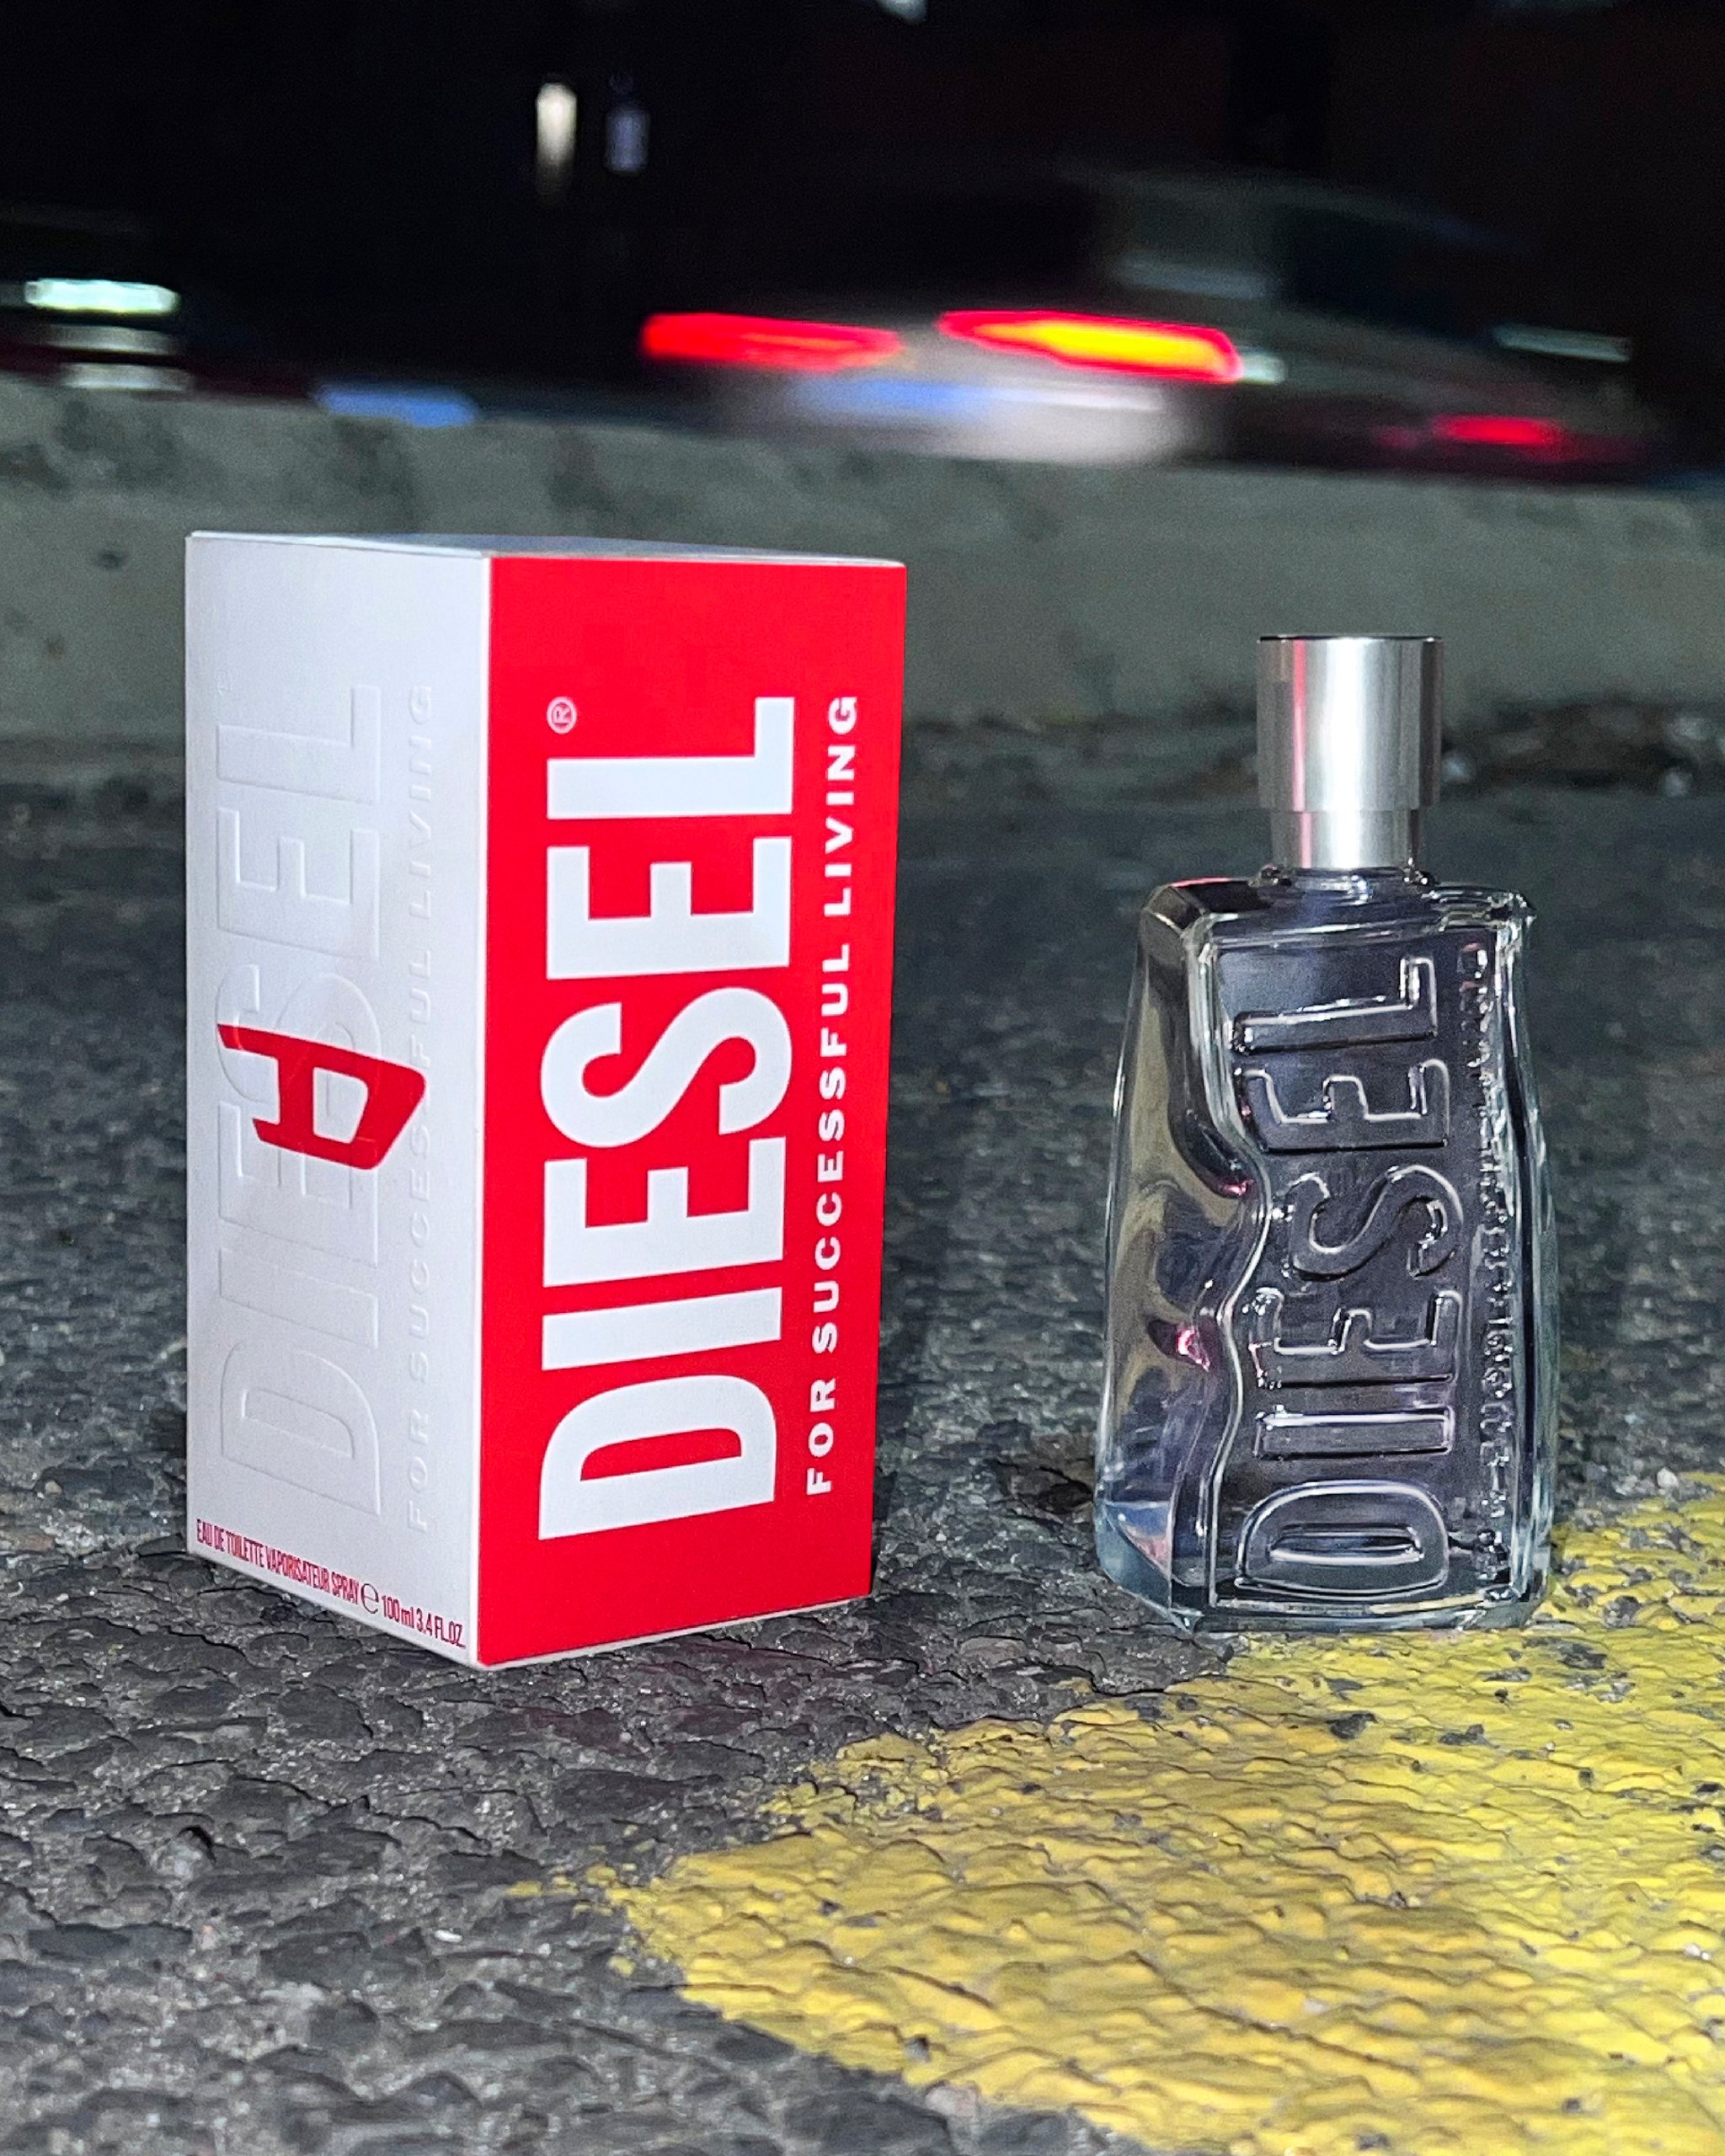 LOW_D-BY-DIESEL---THE-NEW-FRAGRANCE_PRODUCT-GLORIFICATION-STILL-LIFE-_PR-CROPS_DI766_LOREAL-FRAGRANCE-22_DIGITAL-CAMPAIGN_PRODUCT-GLORIFICATION_PR-CROPS_72dpi_08